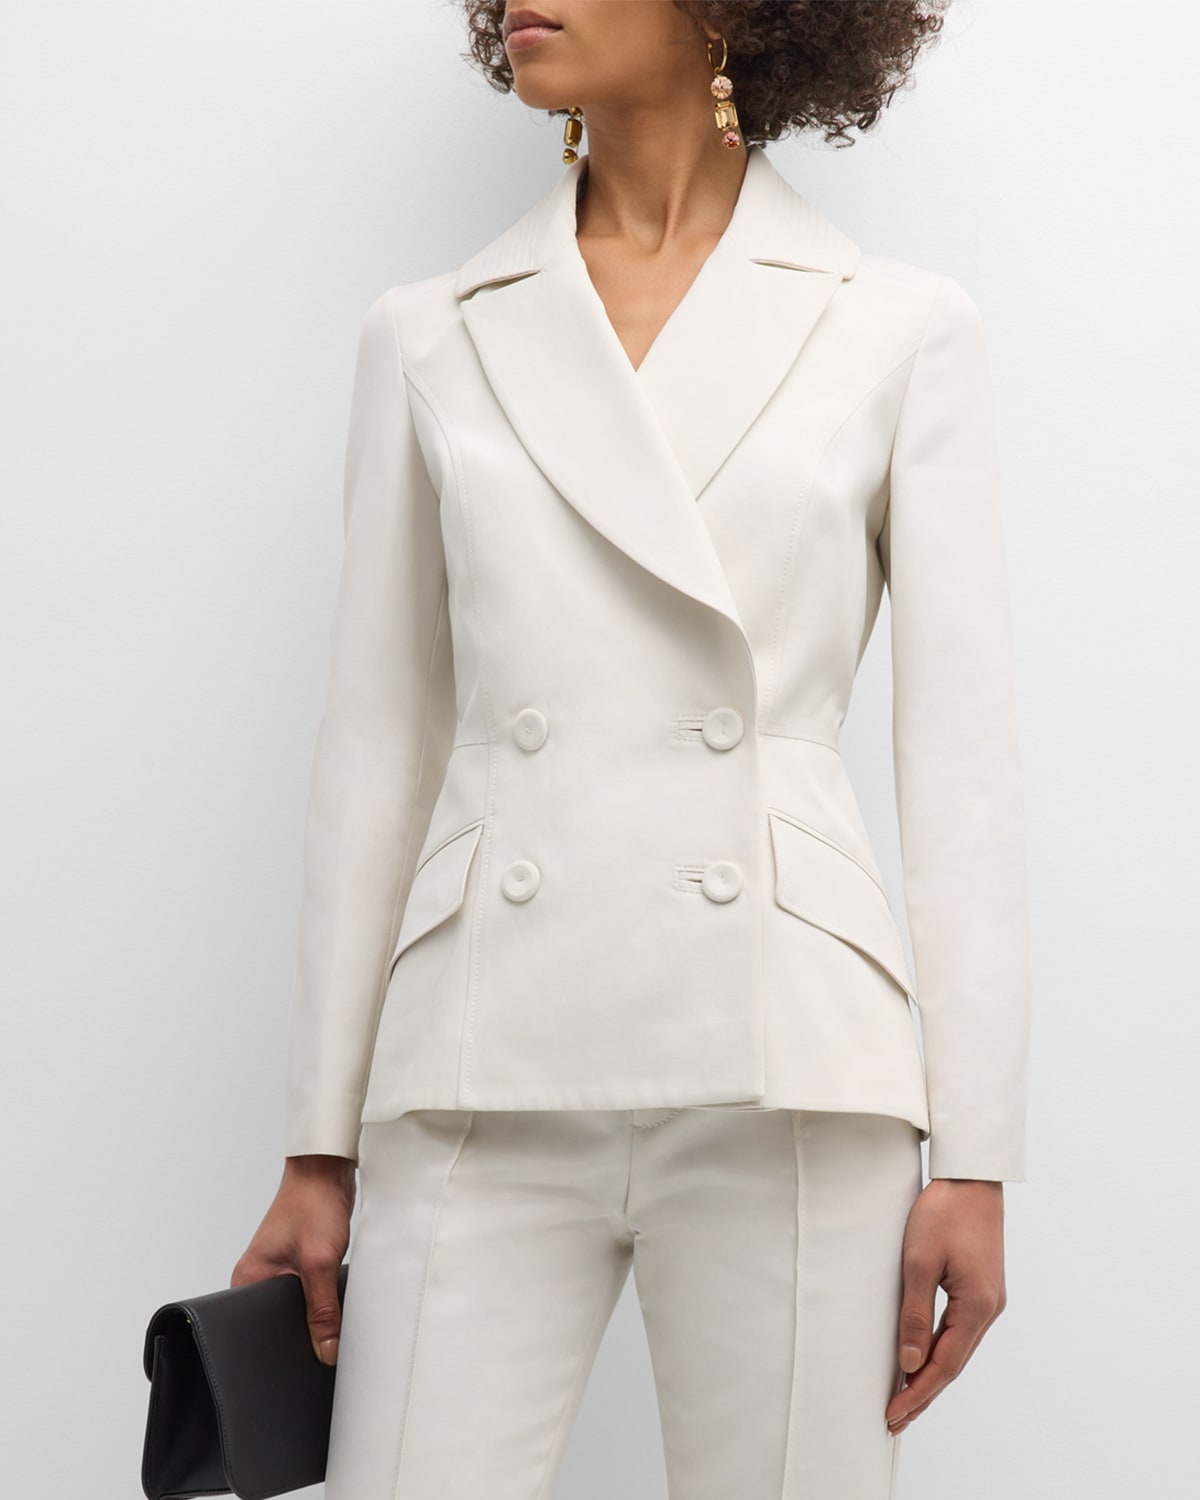 Dice Kayek Slim Double-breasted Blazer Jacket In Off White